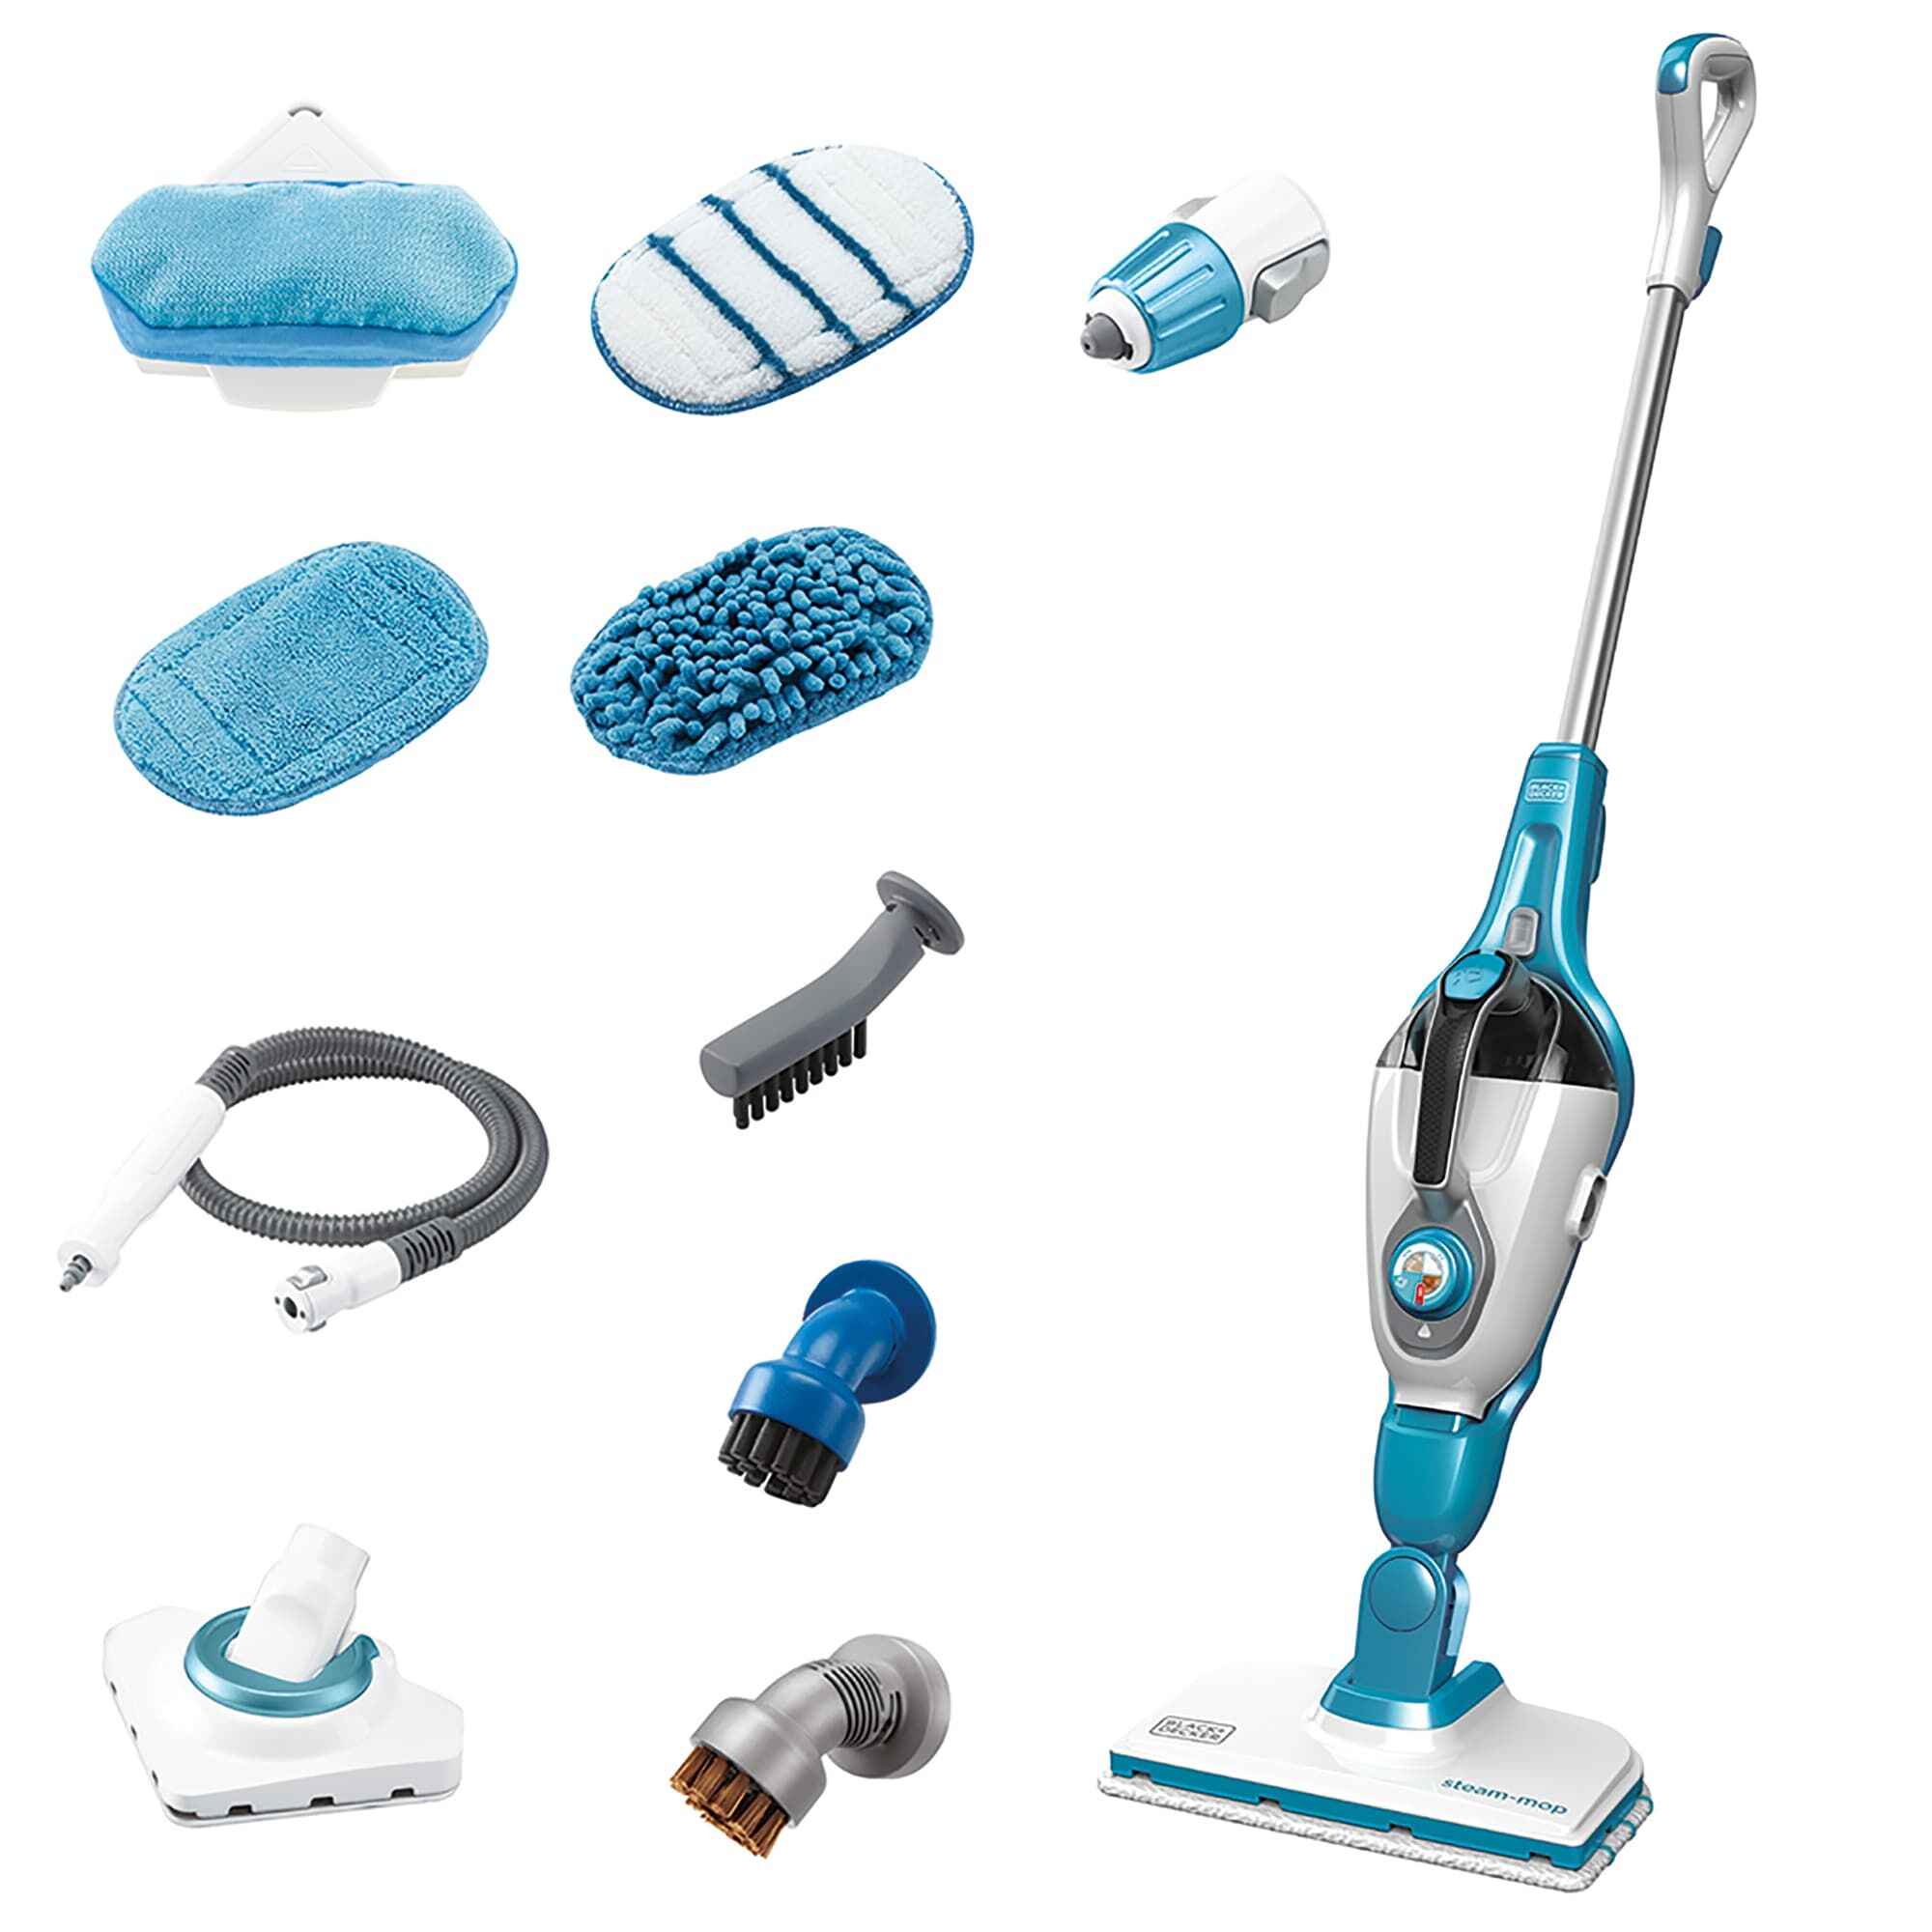 Kit contents for the 7 in 1 steam mop